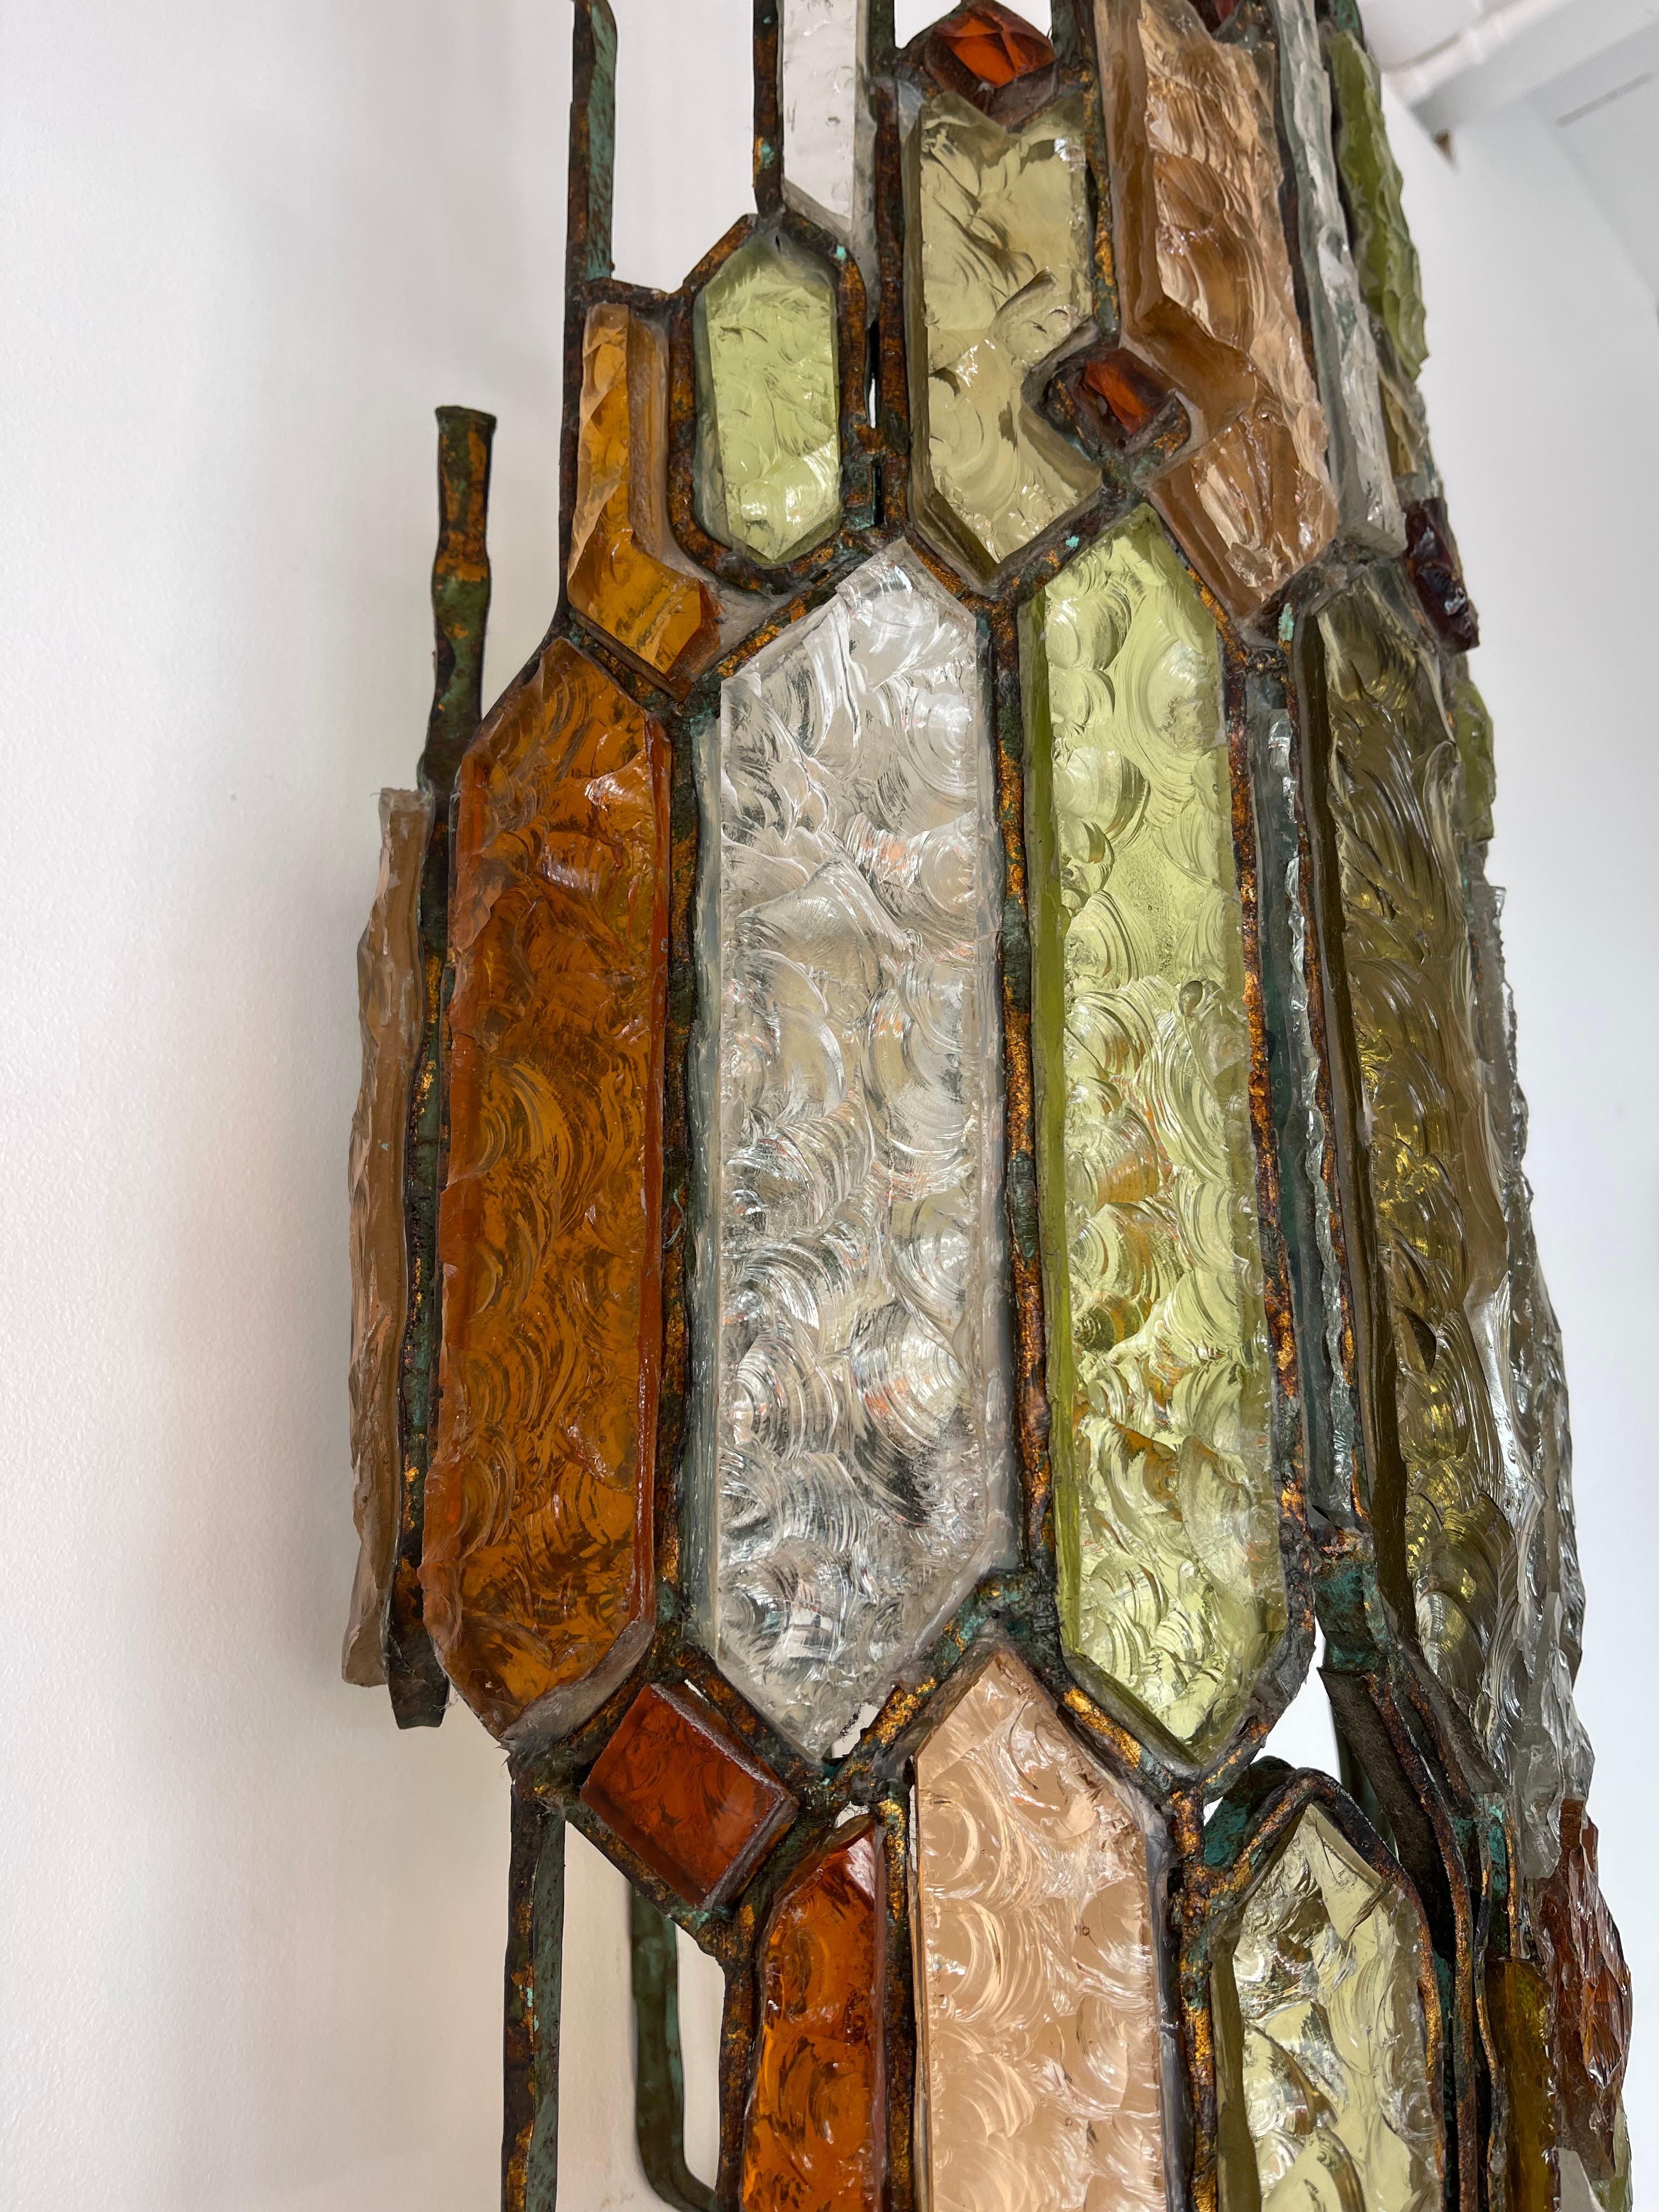 Extra Large wall lamp light sconce multicolor hammered glass and wrought iron, partial gilding gold leaf patina, by the manufacture Longobard in Verona in a Brutalist style, the concurrent of Biancardi Jordan Arte and Poliarte during the 1970s.